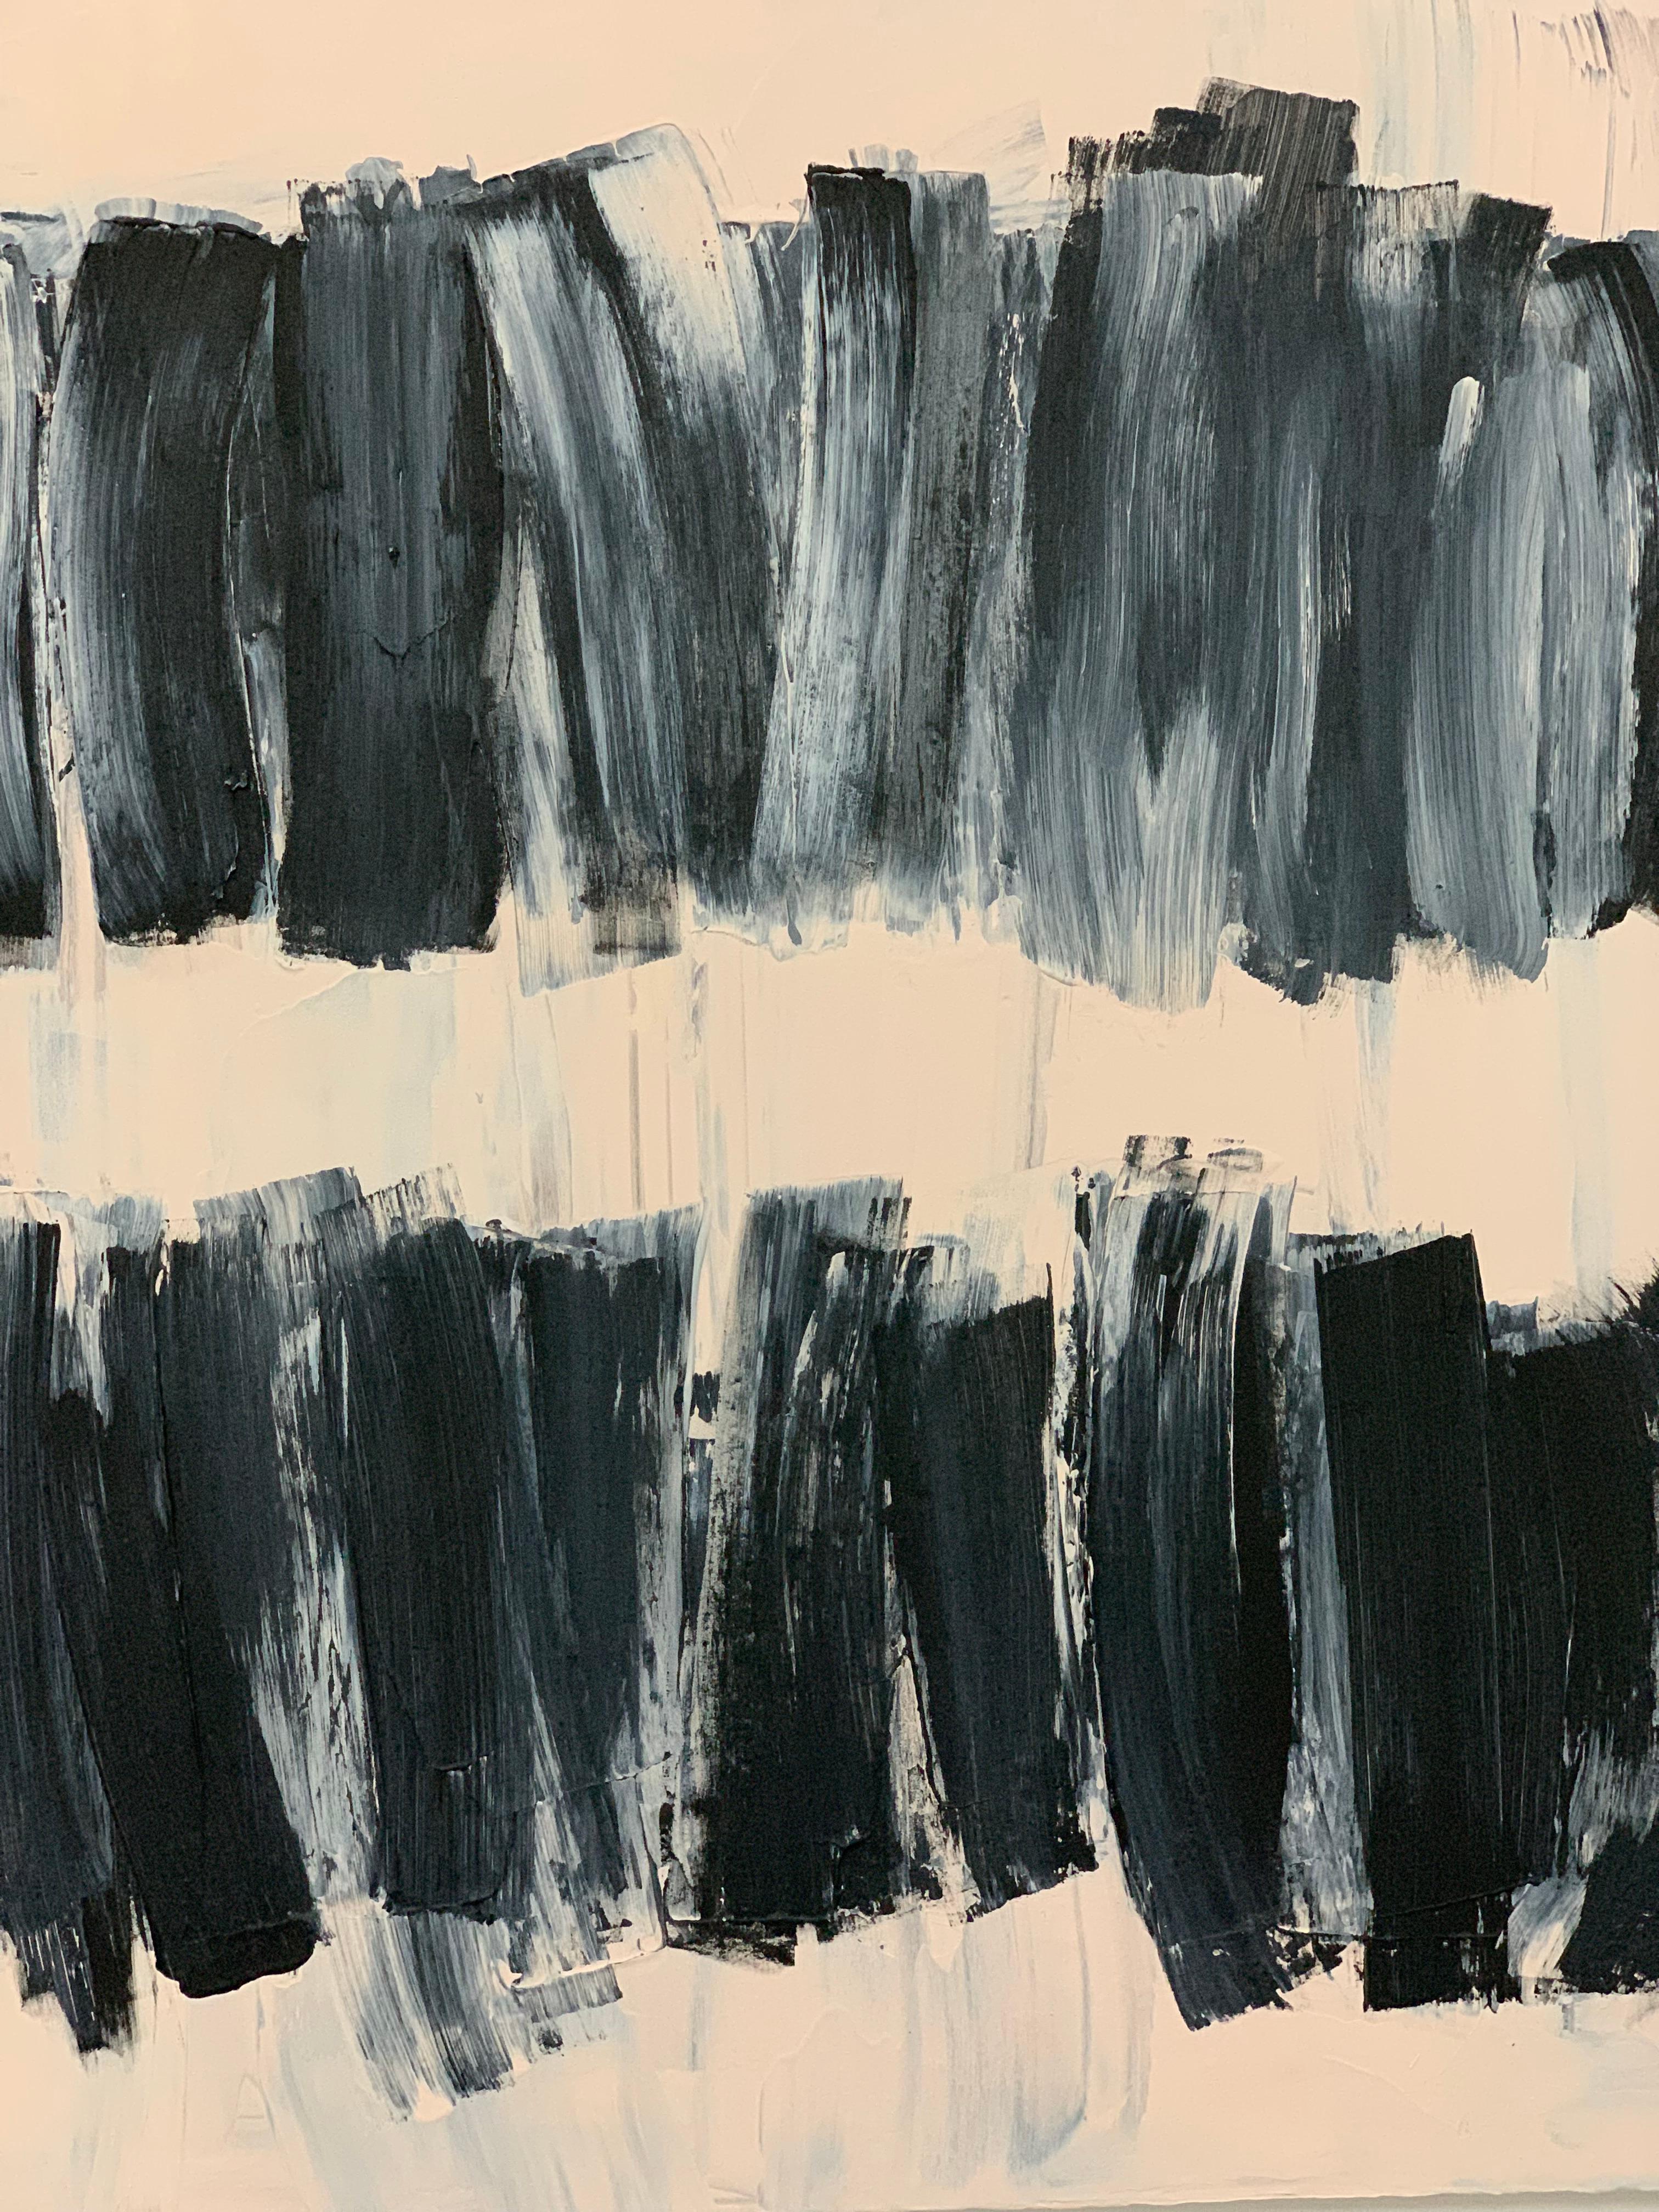 This abstract black and beige painting by Carolanna Parlato paintings draws on memories and imaginings of color and light. They are spaces for color; color is both material and subject. Its effects are revealed in the process of seeing and